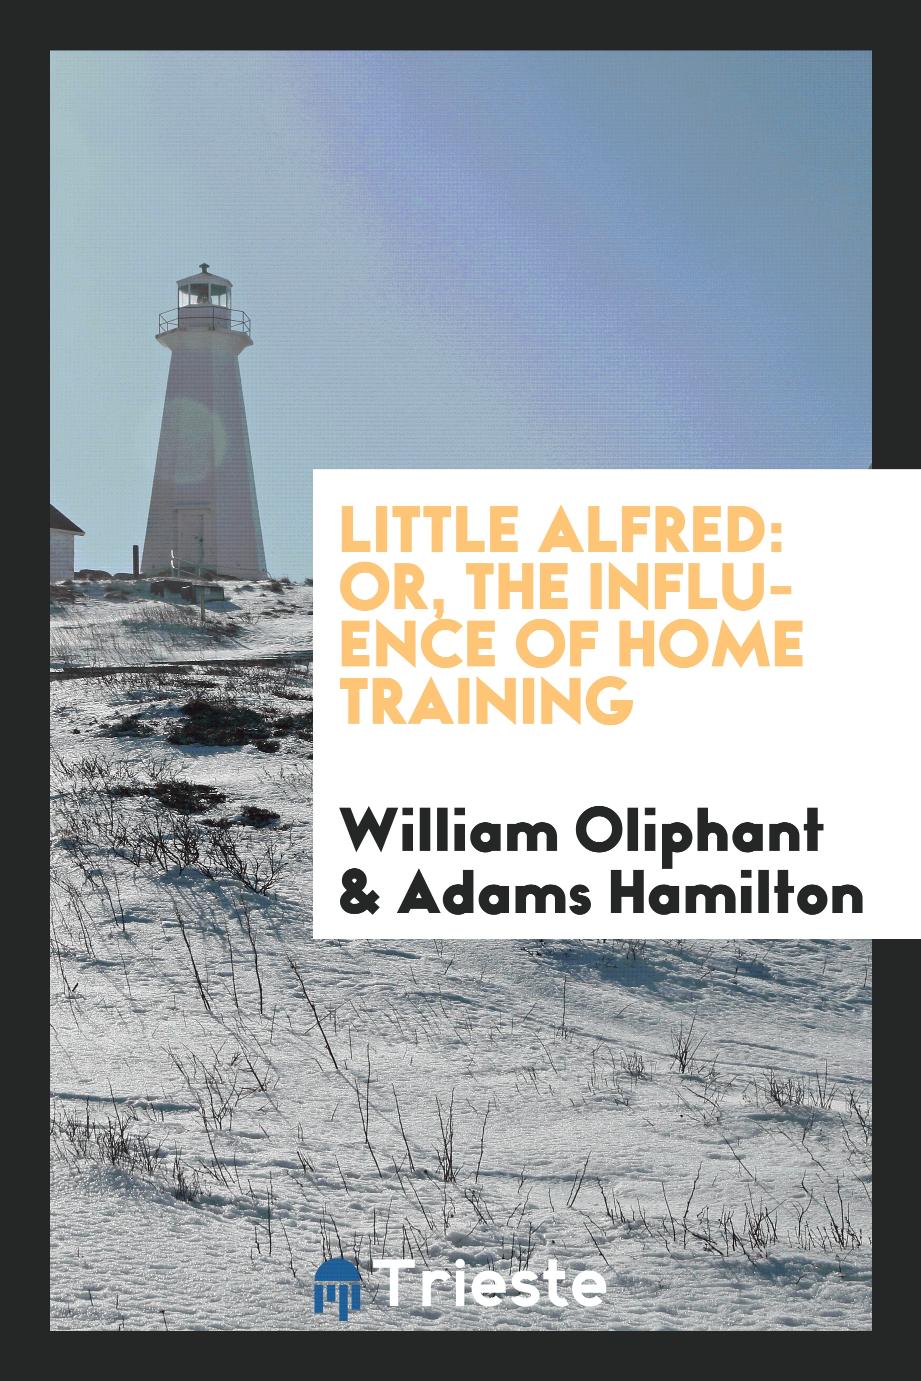 Little Alfred: or, The influence of home training